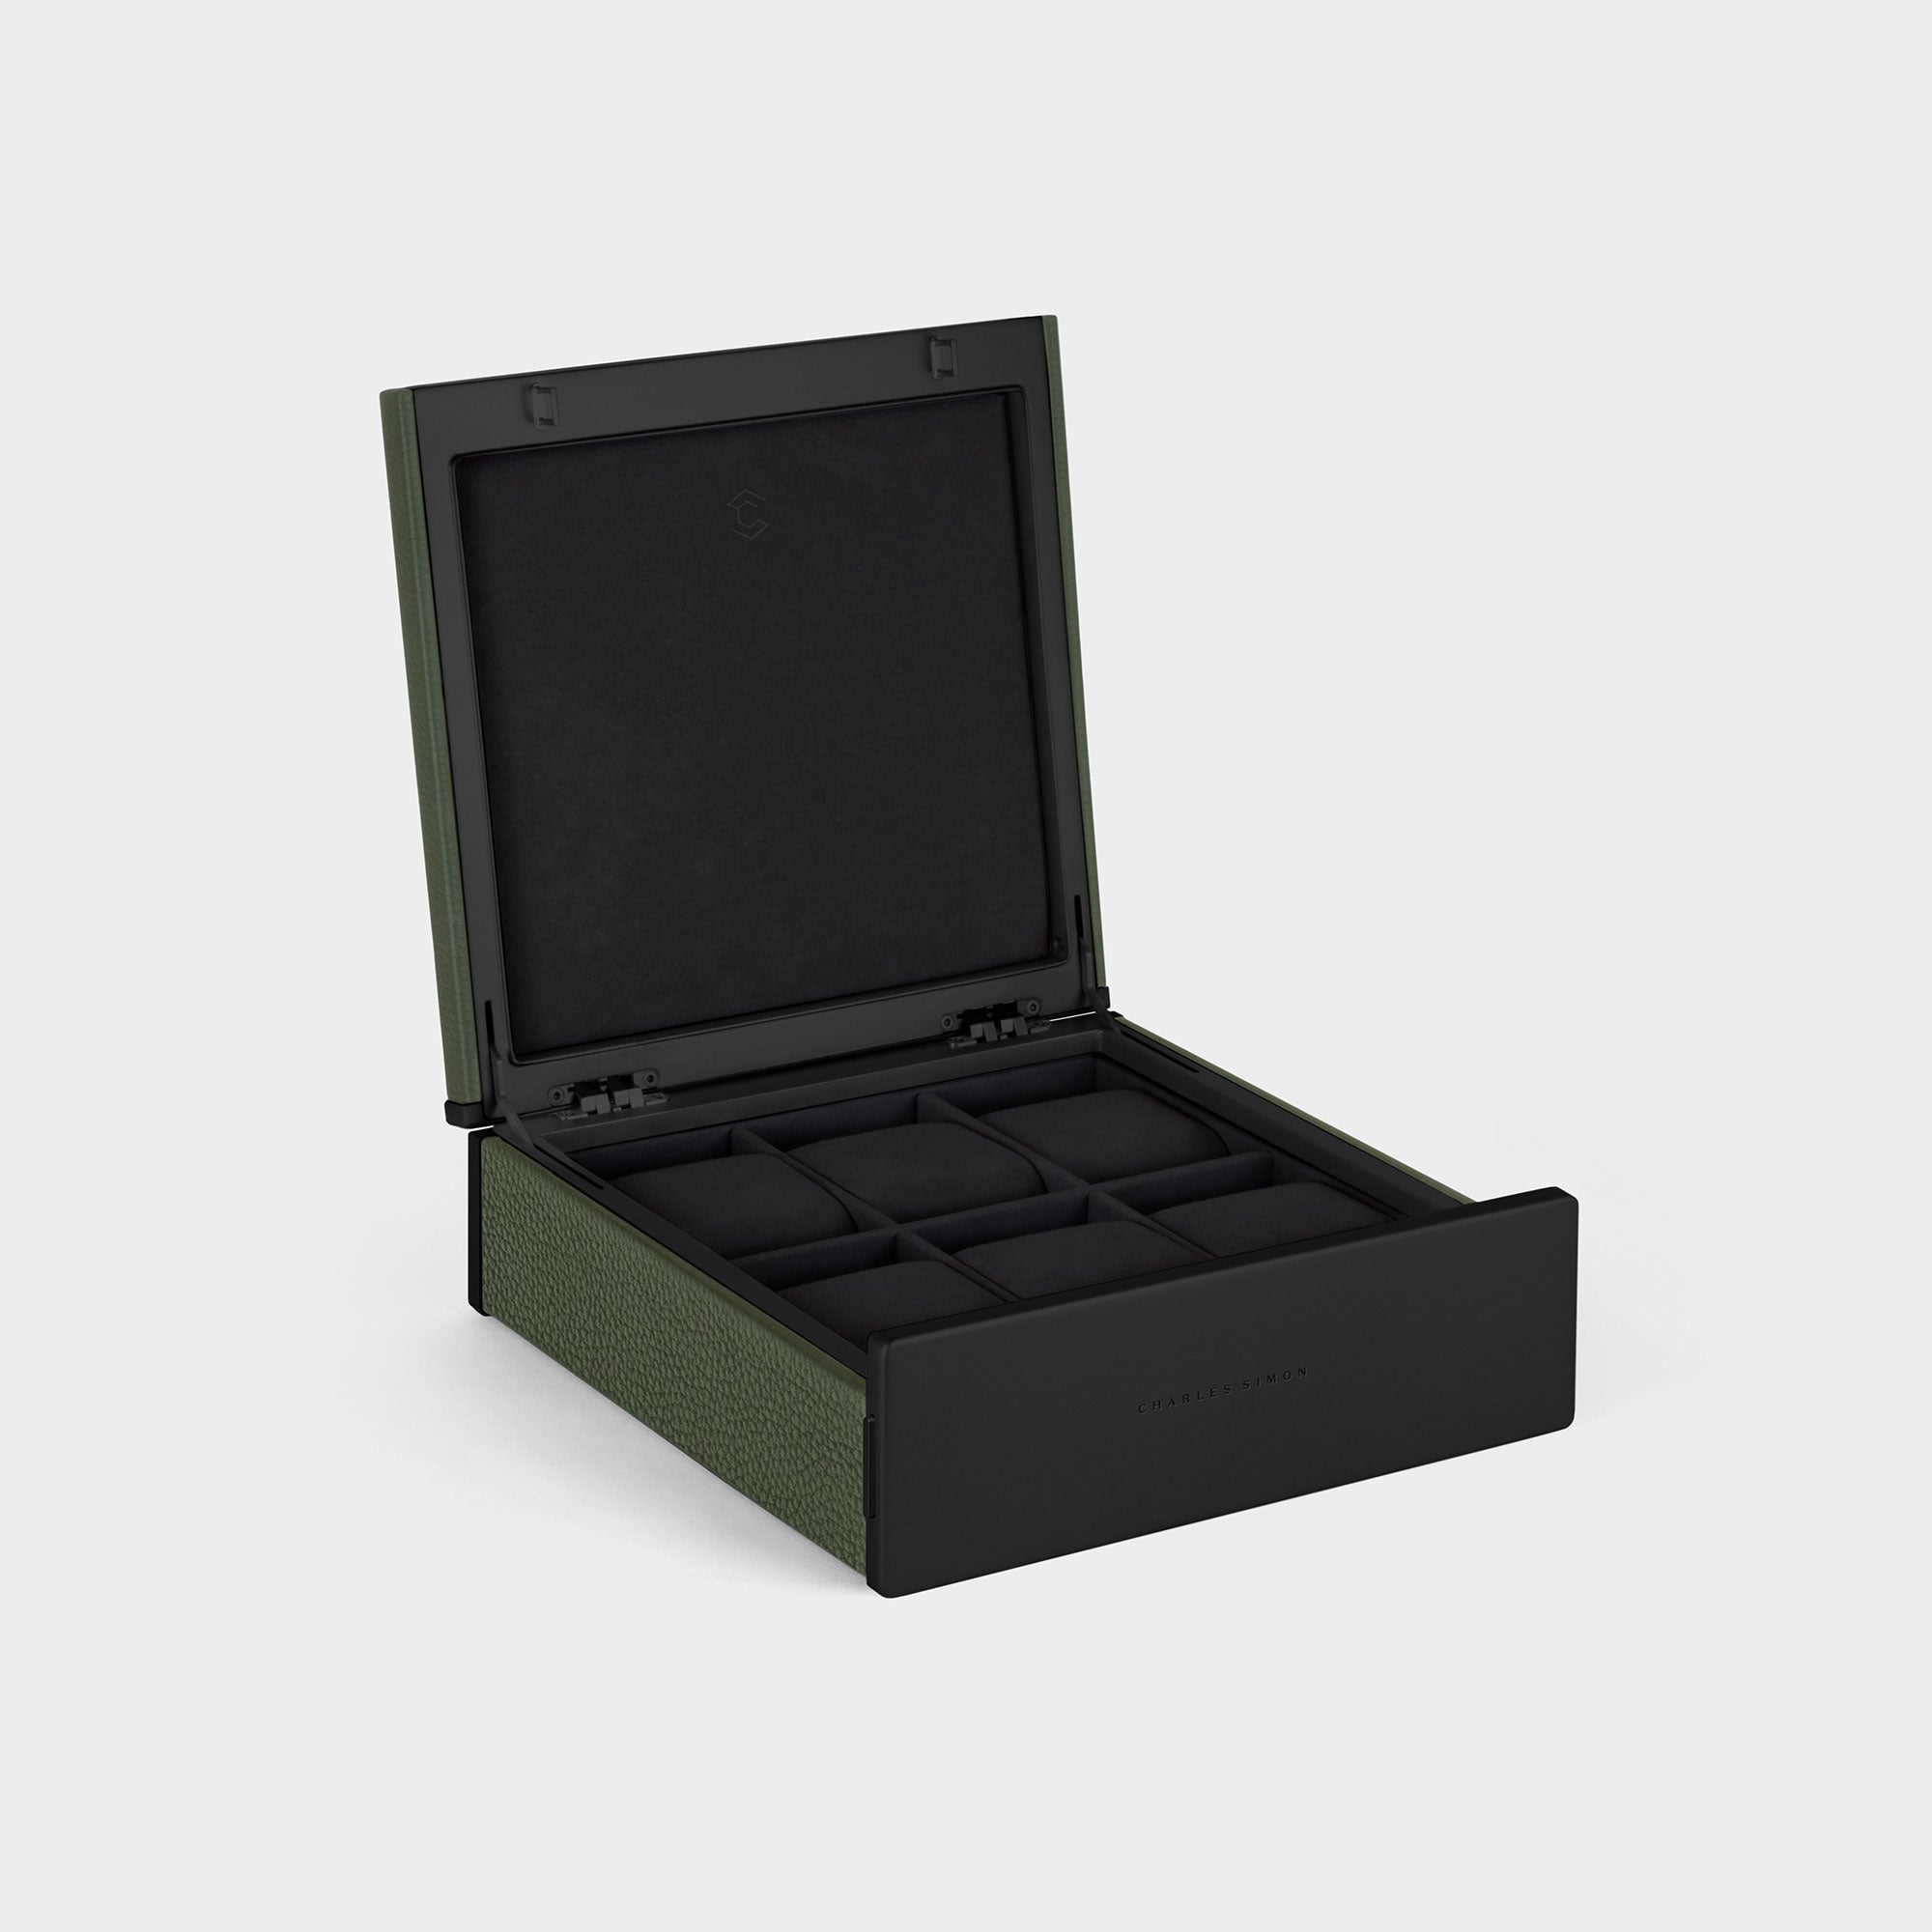 Handmade watch box for 6 watches in khaki leather, carbon fiber and anodized aluminum casing and Notte Alcantara interior